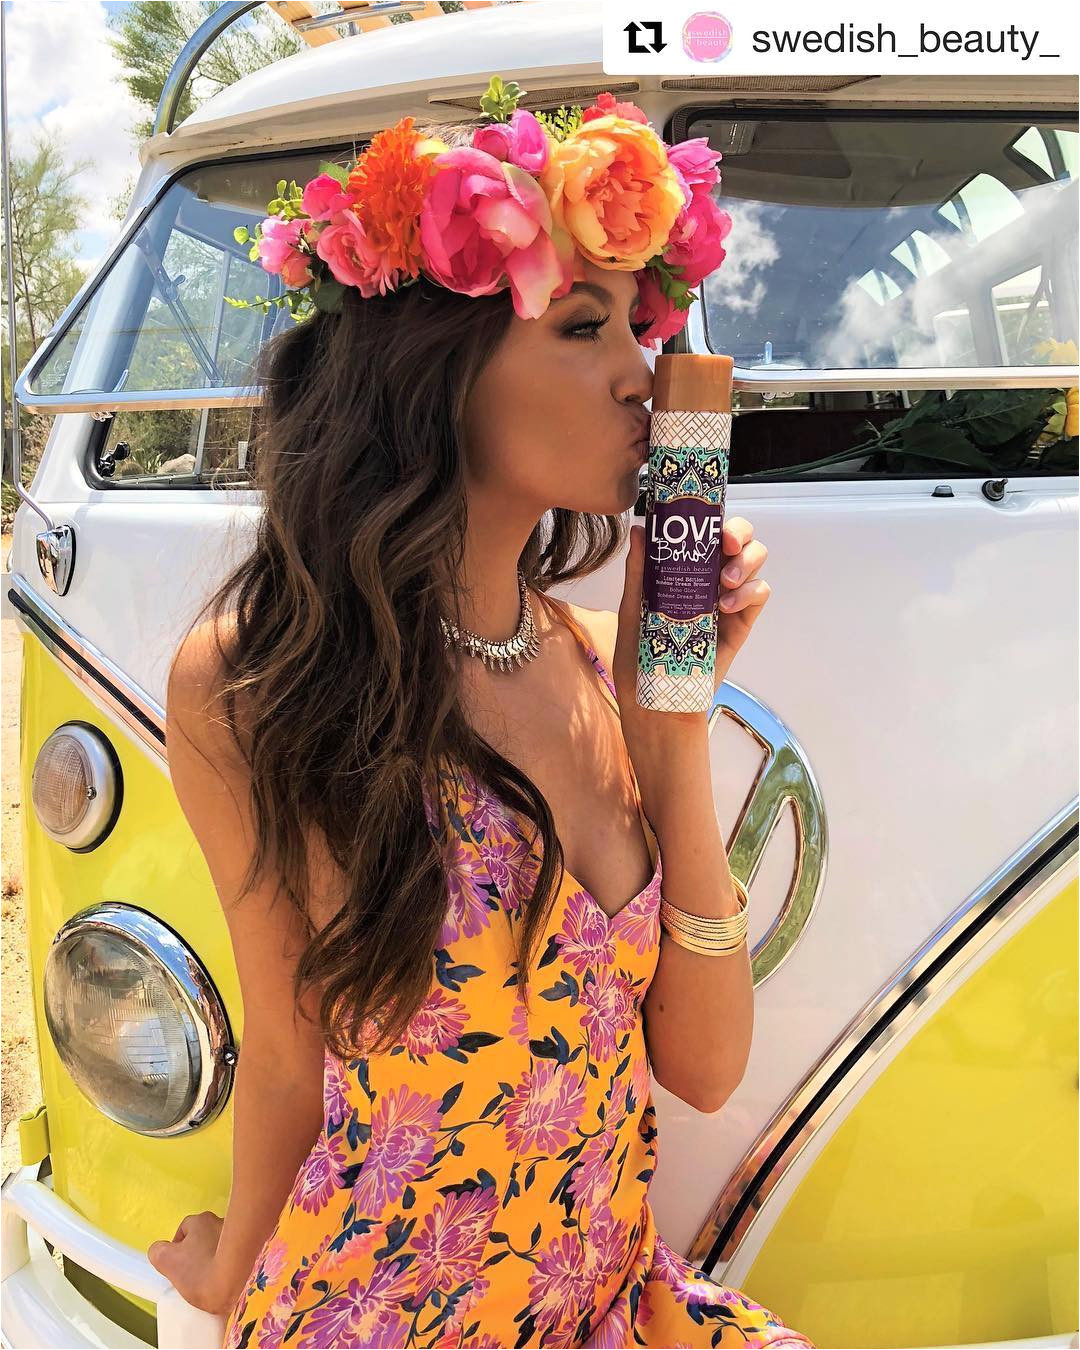 come check out the amazing full line of swedish beauty love boho in stock at the salon repost swedish beauty a a a have you tried our limited edition